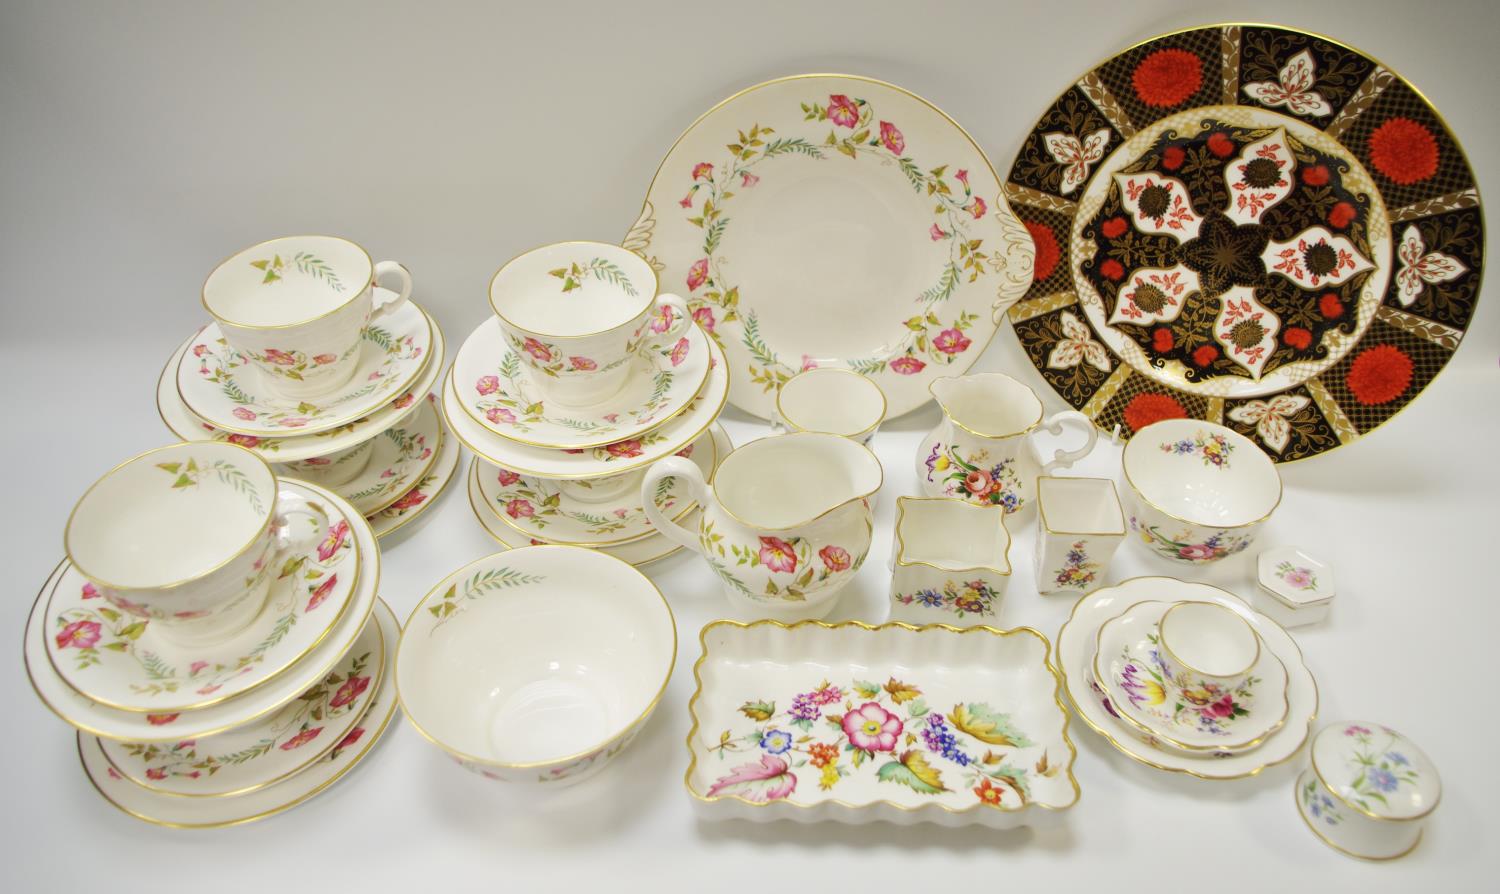 Abbeydale Bone China - a decorative tea setting for five including cups and saucers, cream jug,